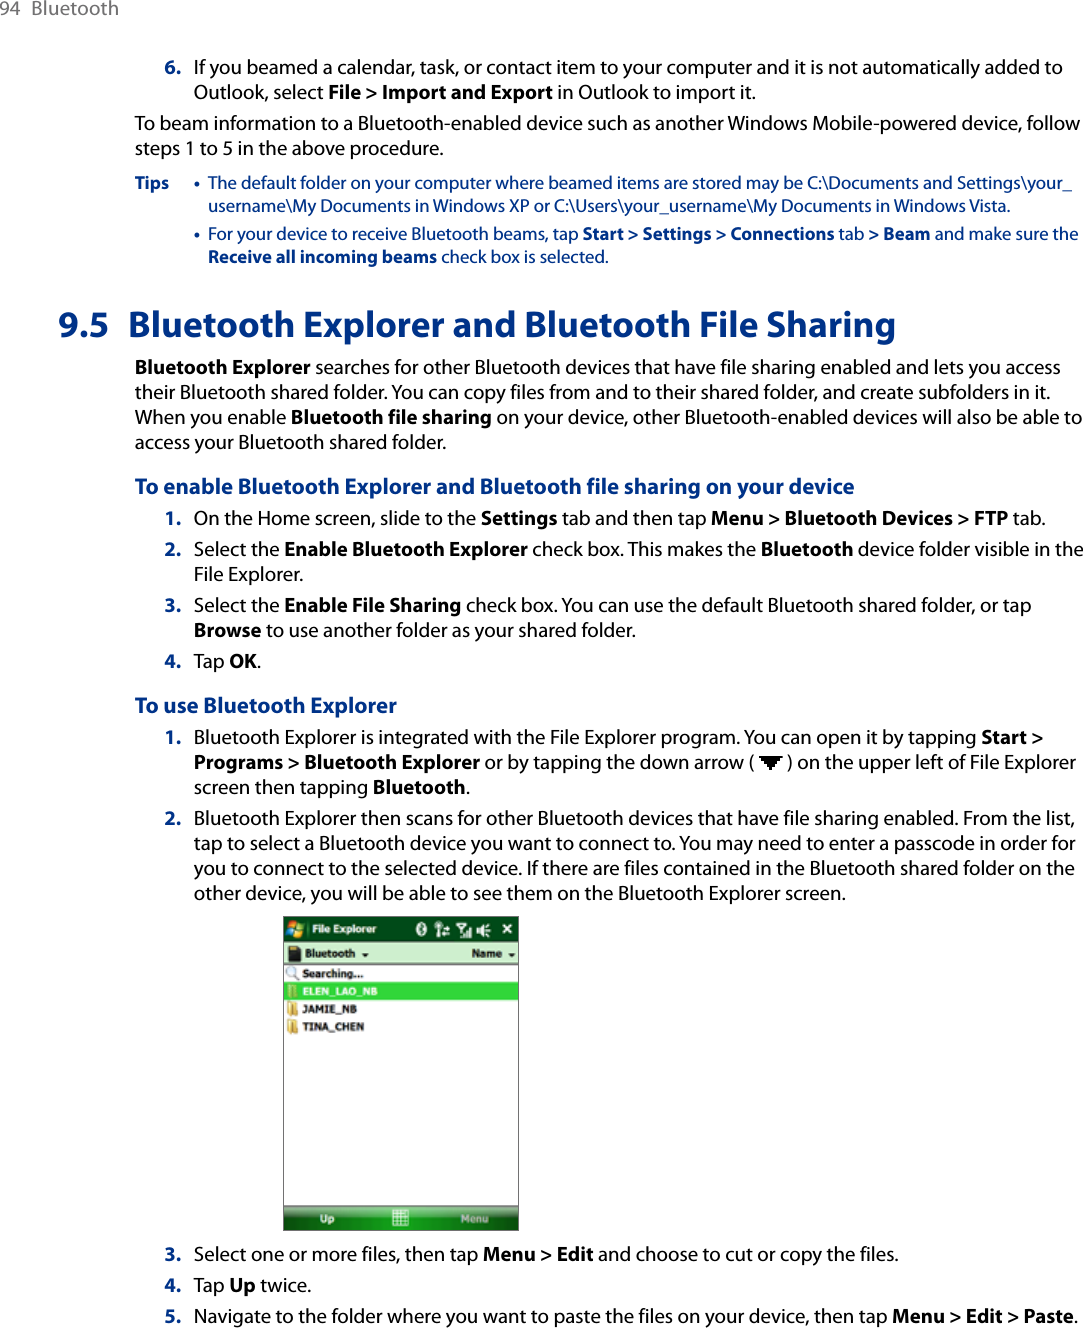 94  Bluetooth6.  If you beamed a calendar, task, or contact item to your computer and it is not automatically added to Outlook, select File &gt; Import and Export in Outlook to import it.To beam information to a Bluetooth-enabled device such as another Windows Mobile-powered device, follow steps 1 to 5 in the above procedure.Tips •   The default folder on your computer where beamed items are stored may be C:\Documents and Settings\your_username\My Documents in Windows XP or C:\Users\your_username\My Documents in Windows Vista.  •   For your device to receive Bluetooth beams, tap Start &gt; Settings &gt; Connections tab &gt; Beam and make sure the Receive all incoming beams check box is selected.9.5  Bluetooth Explorer and Bluetooth File SharingBluetooth Explorer searches for other Bluetooth devices that have file sharing enabled and lets you access their Bluetooth shared folder. You can copy files from and to their shared folder, and create subfolders in it. When you enable Bluetooth file sharing on your device, other Bluetooth-enabled devices will also be able to access your Bluetooth shared folder.To enable Bluetooth Explorer and Bluetooth file sharing on your device1.  On the Home screen, slide to the Settings tab and then tap Menu &gt; Bluetooth Devices &gt; FTP tab.2.  Select the Enable Bluetooth Explorer check box. This makes the Bluetooth device folder visible in the File Explorer.3.  Select the Enable File Sharing check box. You can use the default Bluetooth shared folder, or tap Browse to use another folder as your shared folder.4.  Tap OK.To use Bluetooth Explorer1.  Bluetooth Explorer is integrated with the File Explorer program. You can open it by tapping Start &gt; Programs &gt; Bluetooth Explorer or by tapping the down arrow (   ) on the upper left of File Explorer screen then tapping Bluetooth.2.  Bluetooth Explorer then scans for other Bluetooth devices that have file sharing enabled. From the list, tap to select a Bluetooth device you want to connect to. You may need to enter a passcode in order for you to connect to the selected device. If there are files contained in the Bluetooth shared folder on the other device, you will be able to see them on the Bluetooth Explorer screen.     3.  Select one or more files, then tap Menu &gt; Edit and choose to cut or copy the files.4.  Tap Up twice.5.  Navigate to the folder where you want to paste the files on your device, then tap Menu &gt; Edit &gt; Paste.